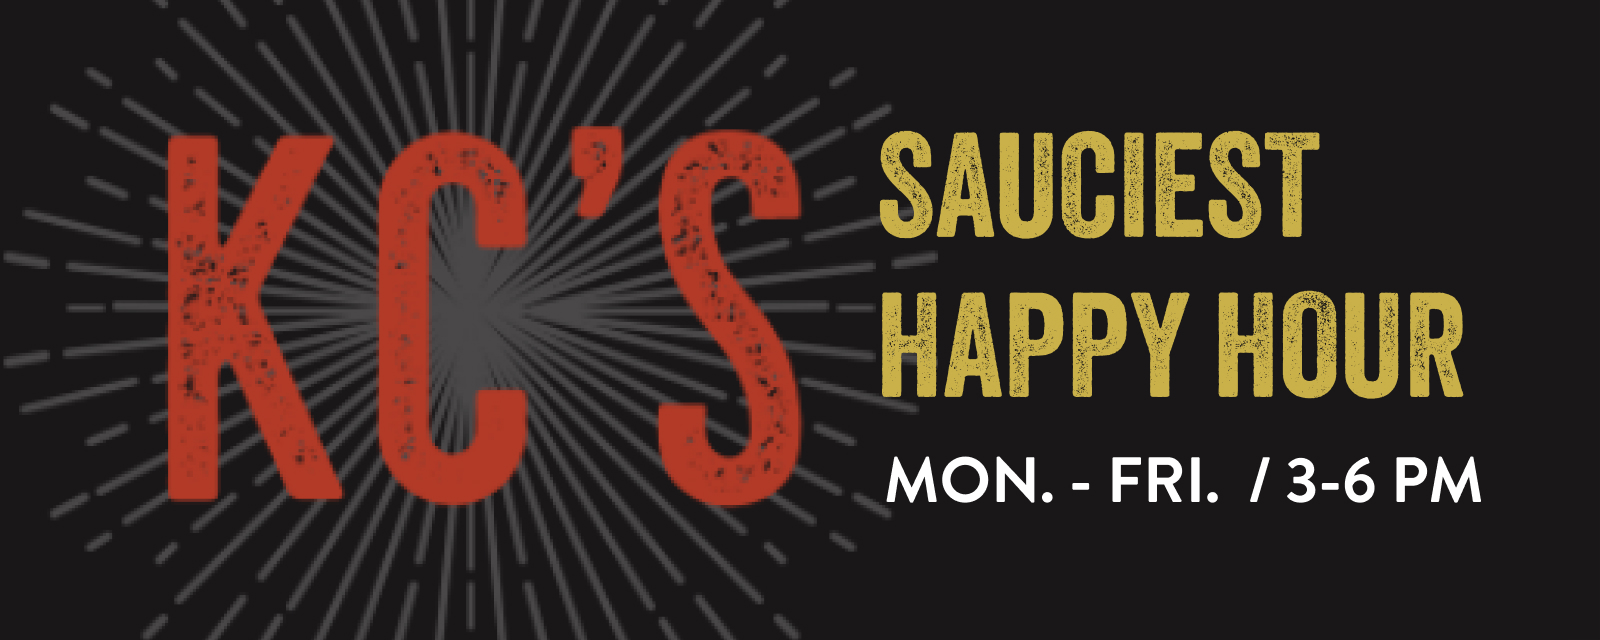 KC's Sauciest Happy Hour - Monday through Friday 3PM to 6PM.